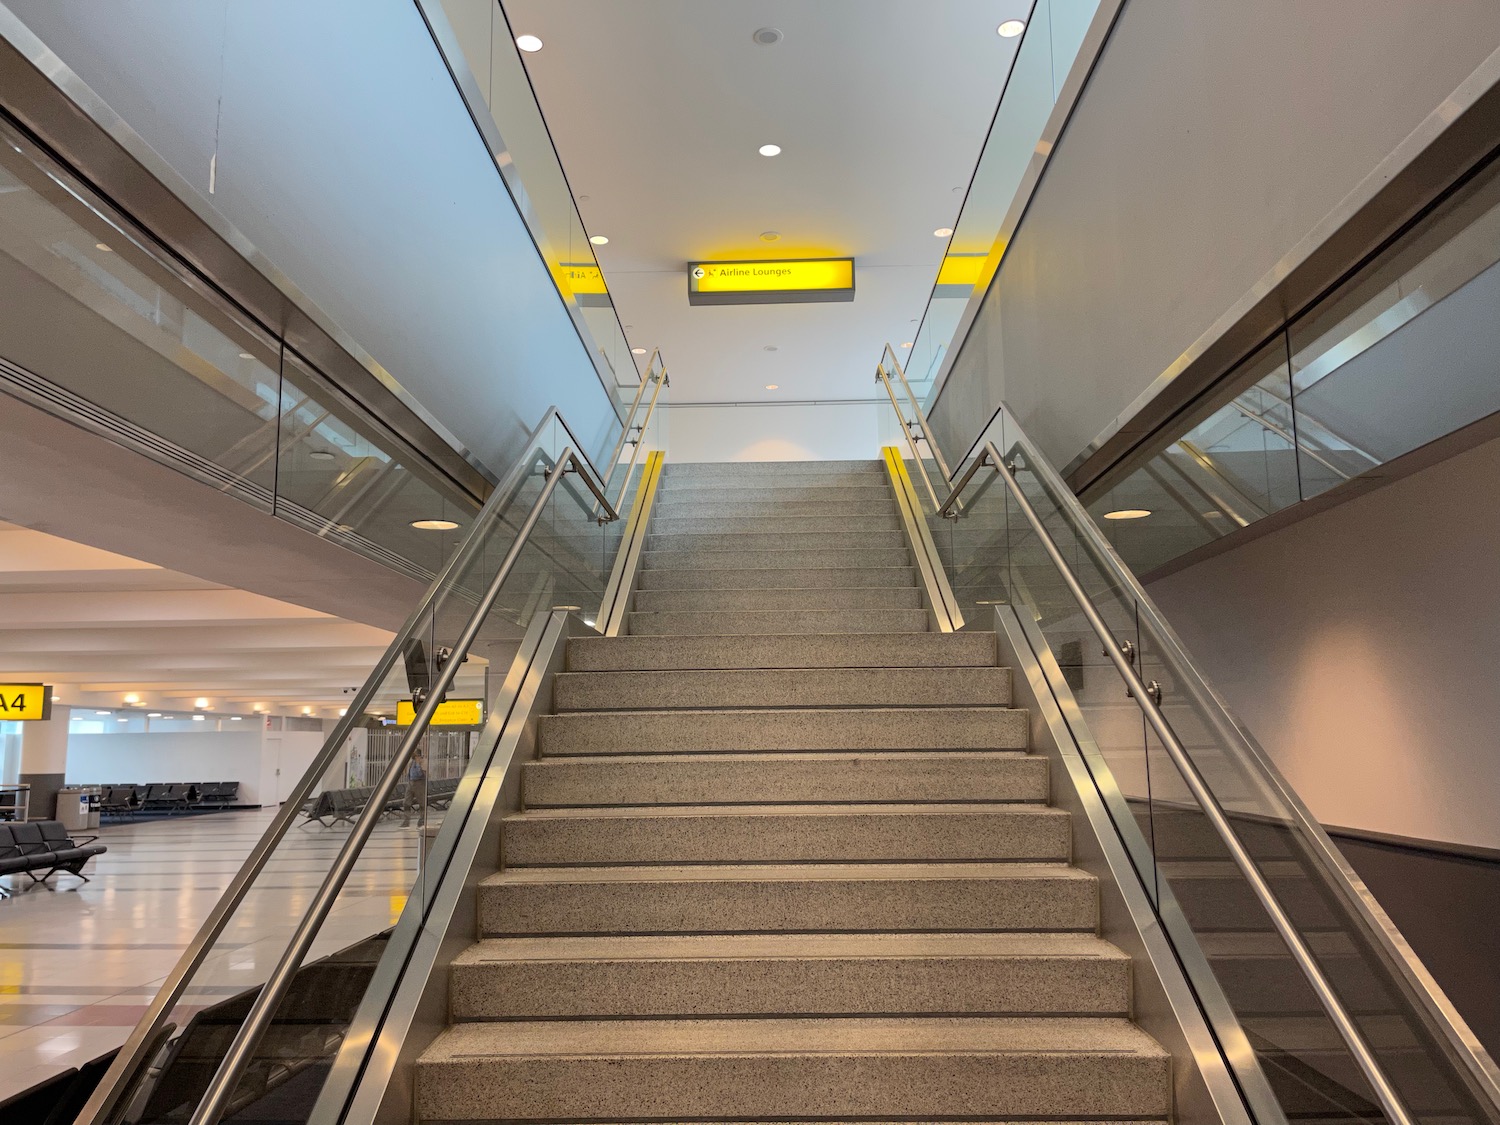 a staircase with metal railings and a yellow sign